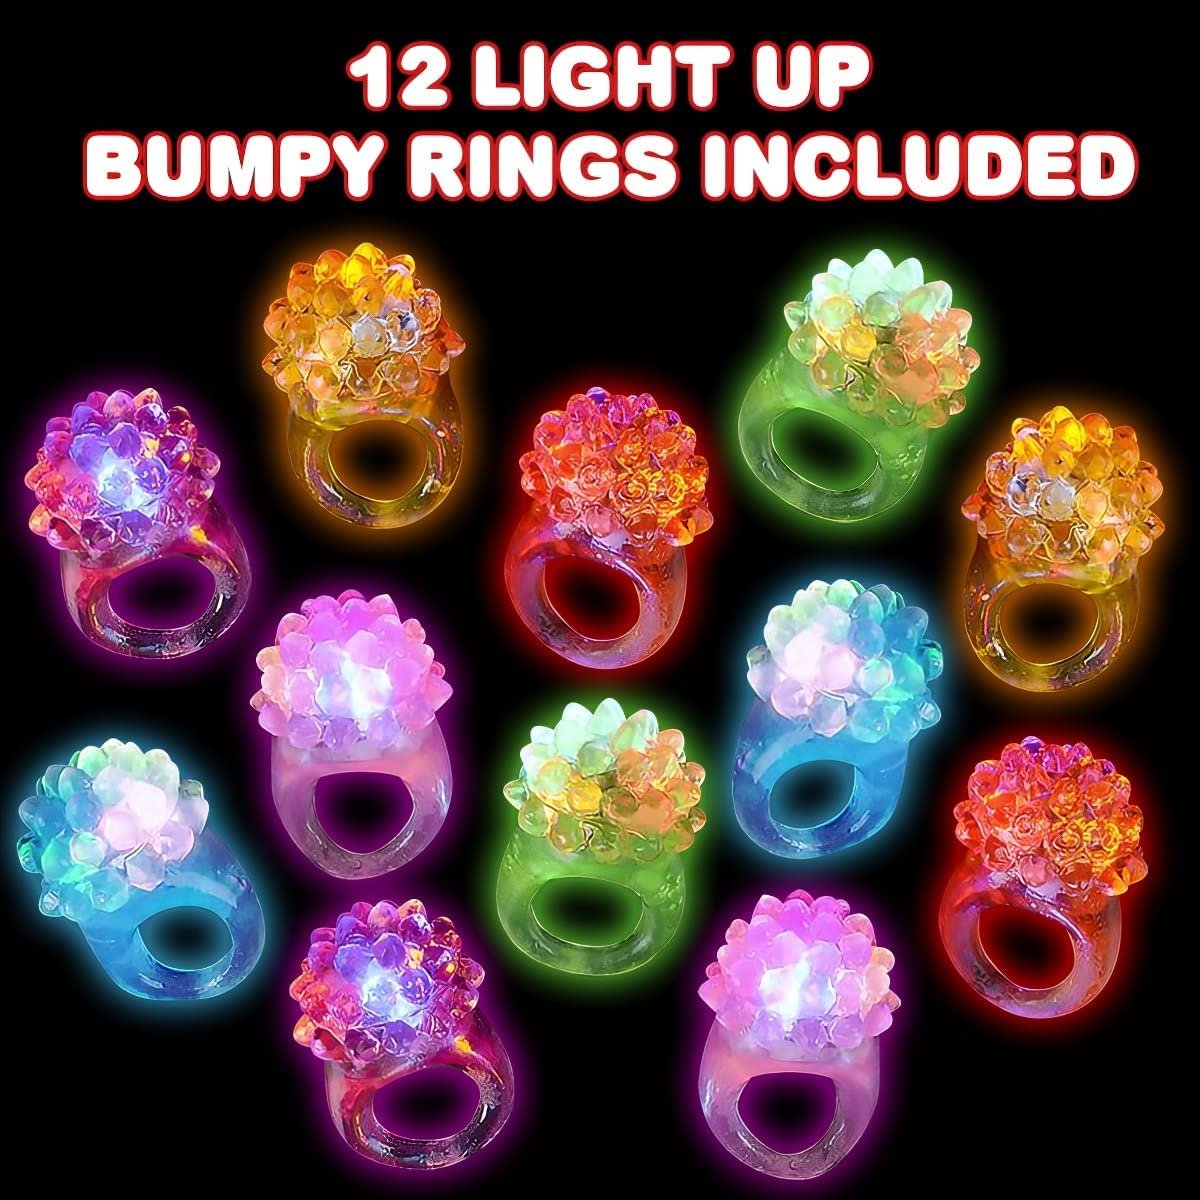 Light Up Bumpy Rings for Kids, Set of 12, Flashing Accessories for Boys and Girls in Assorted Colors, Light-Up Party Favors for Children, Goodie Bag Fillers and Stocking Stuffers